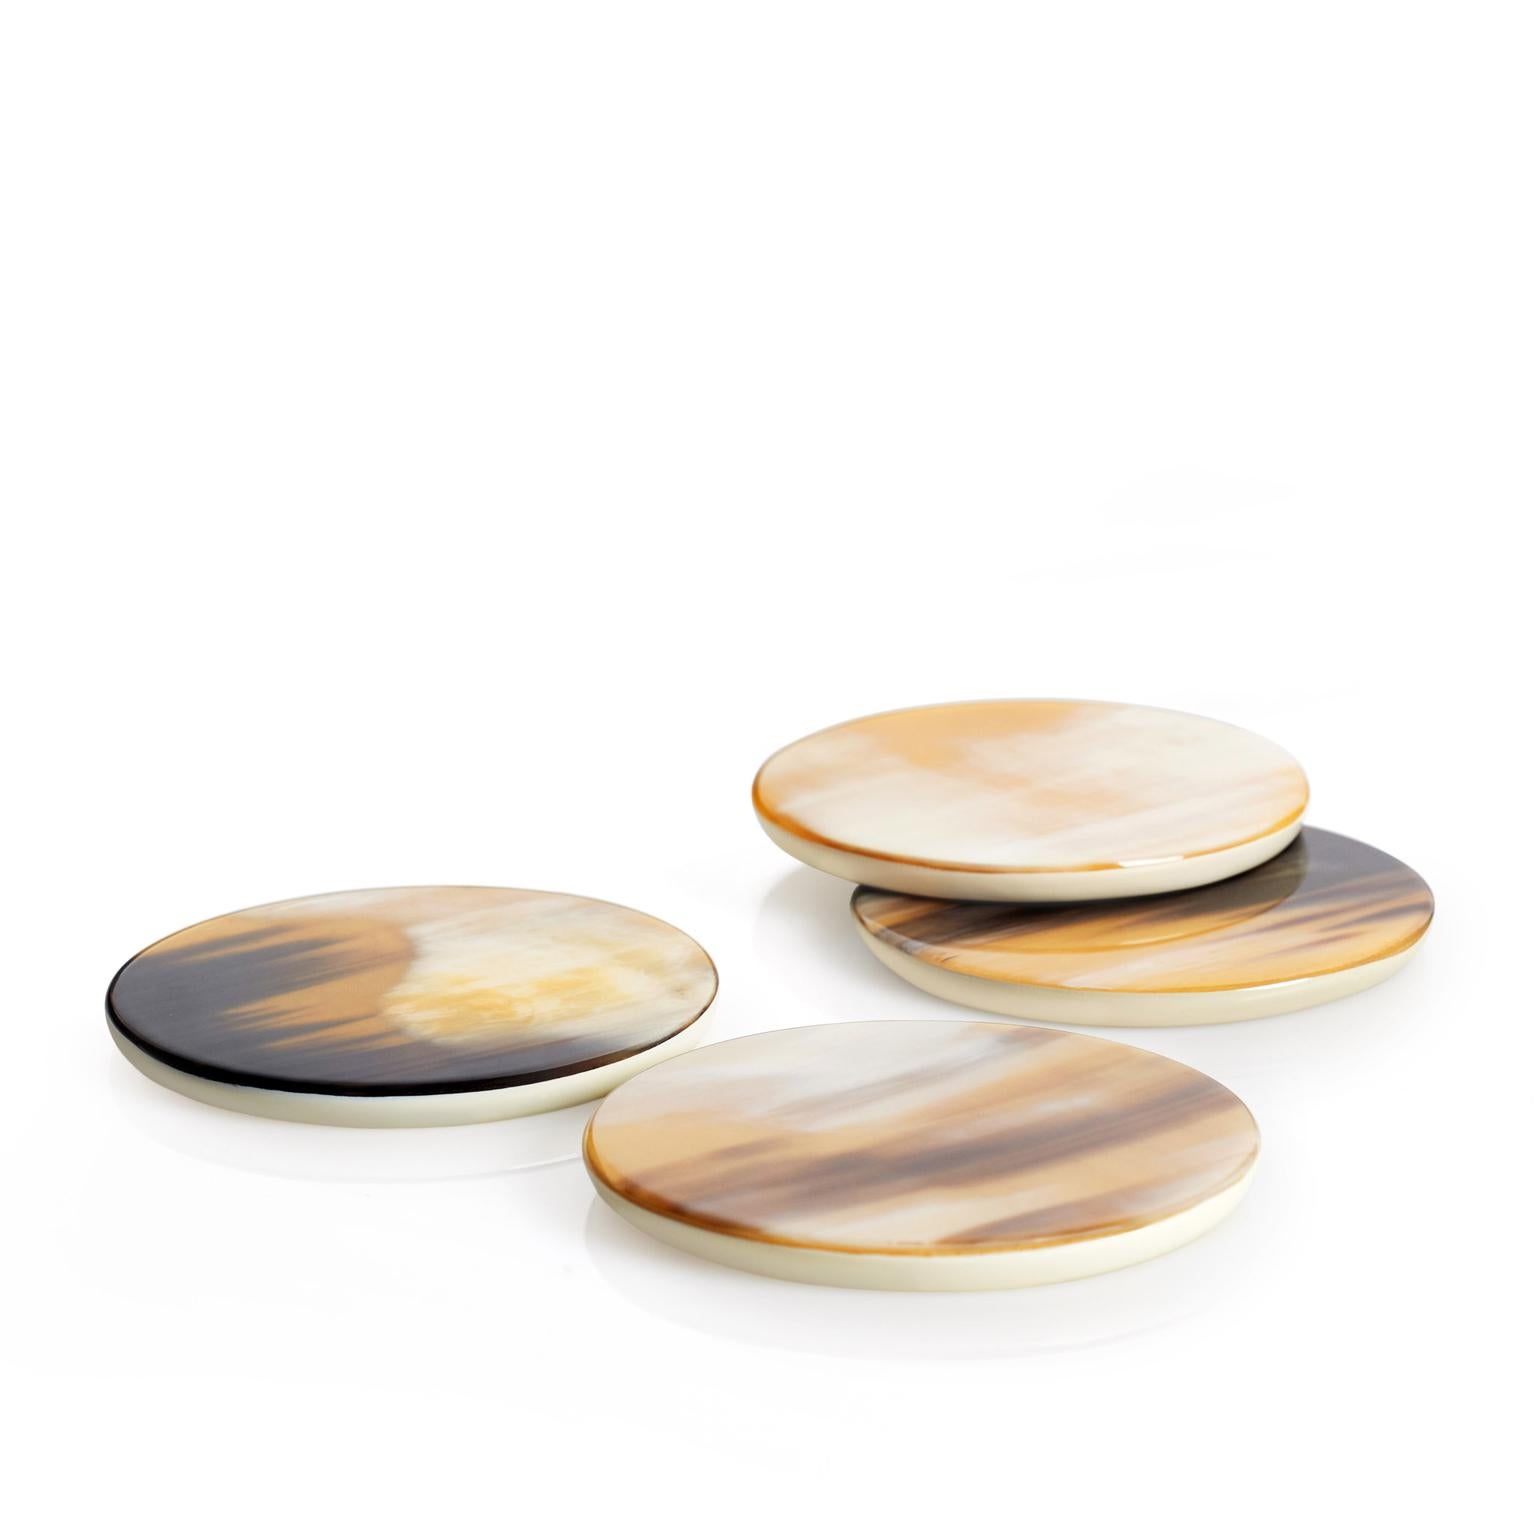 Playing a funtional yet decorative role, these round coasters are a clever blend of exclusive materials and gentle shapes. Handcrafted from lacquered wood with cream-colored finish, each coaster's top showcases the signature patterns and the unique